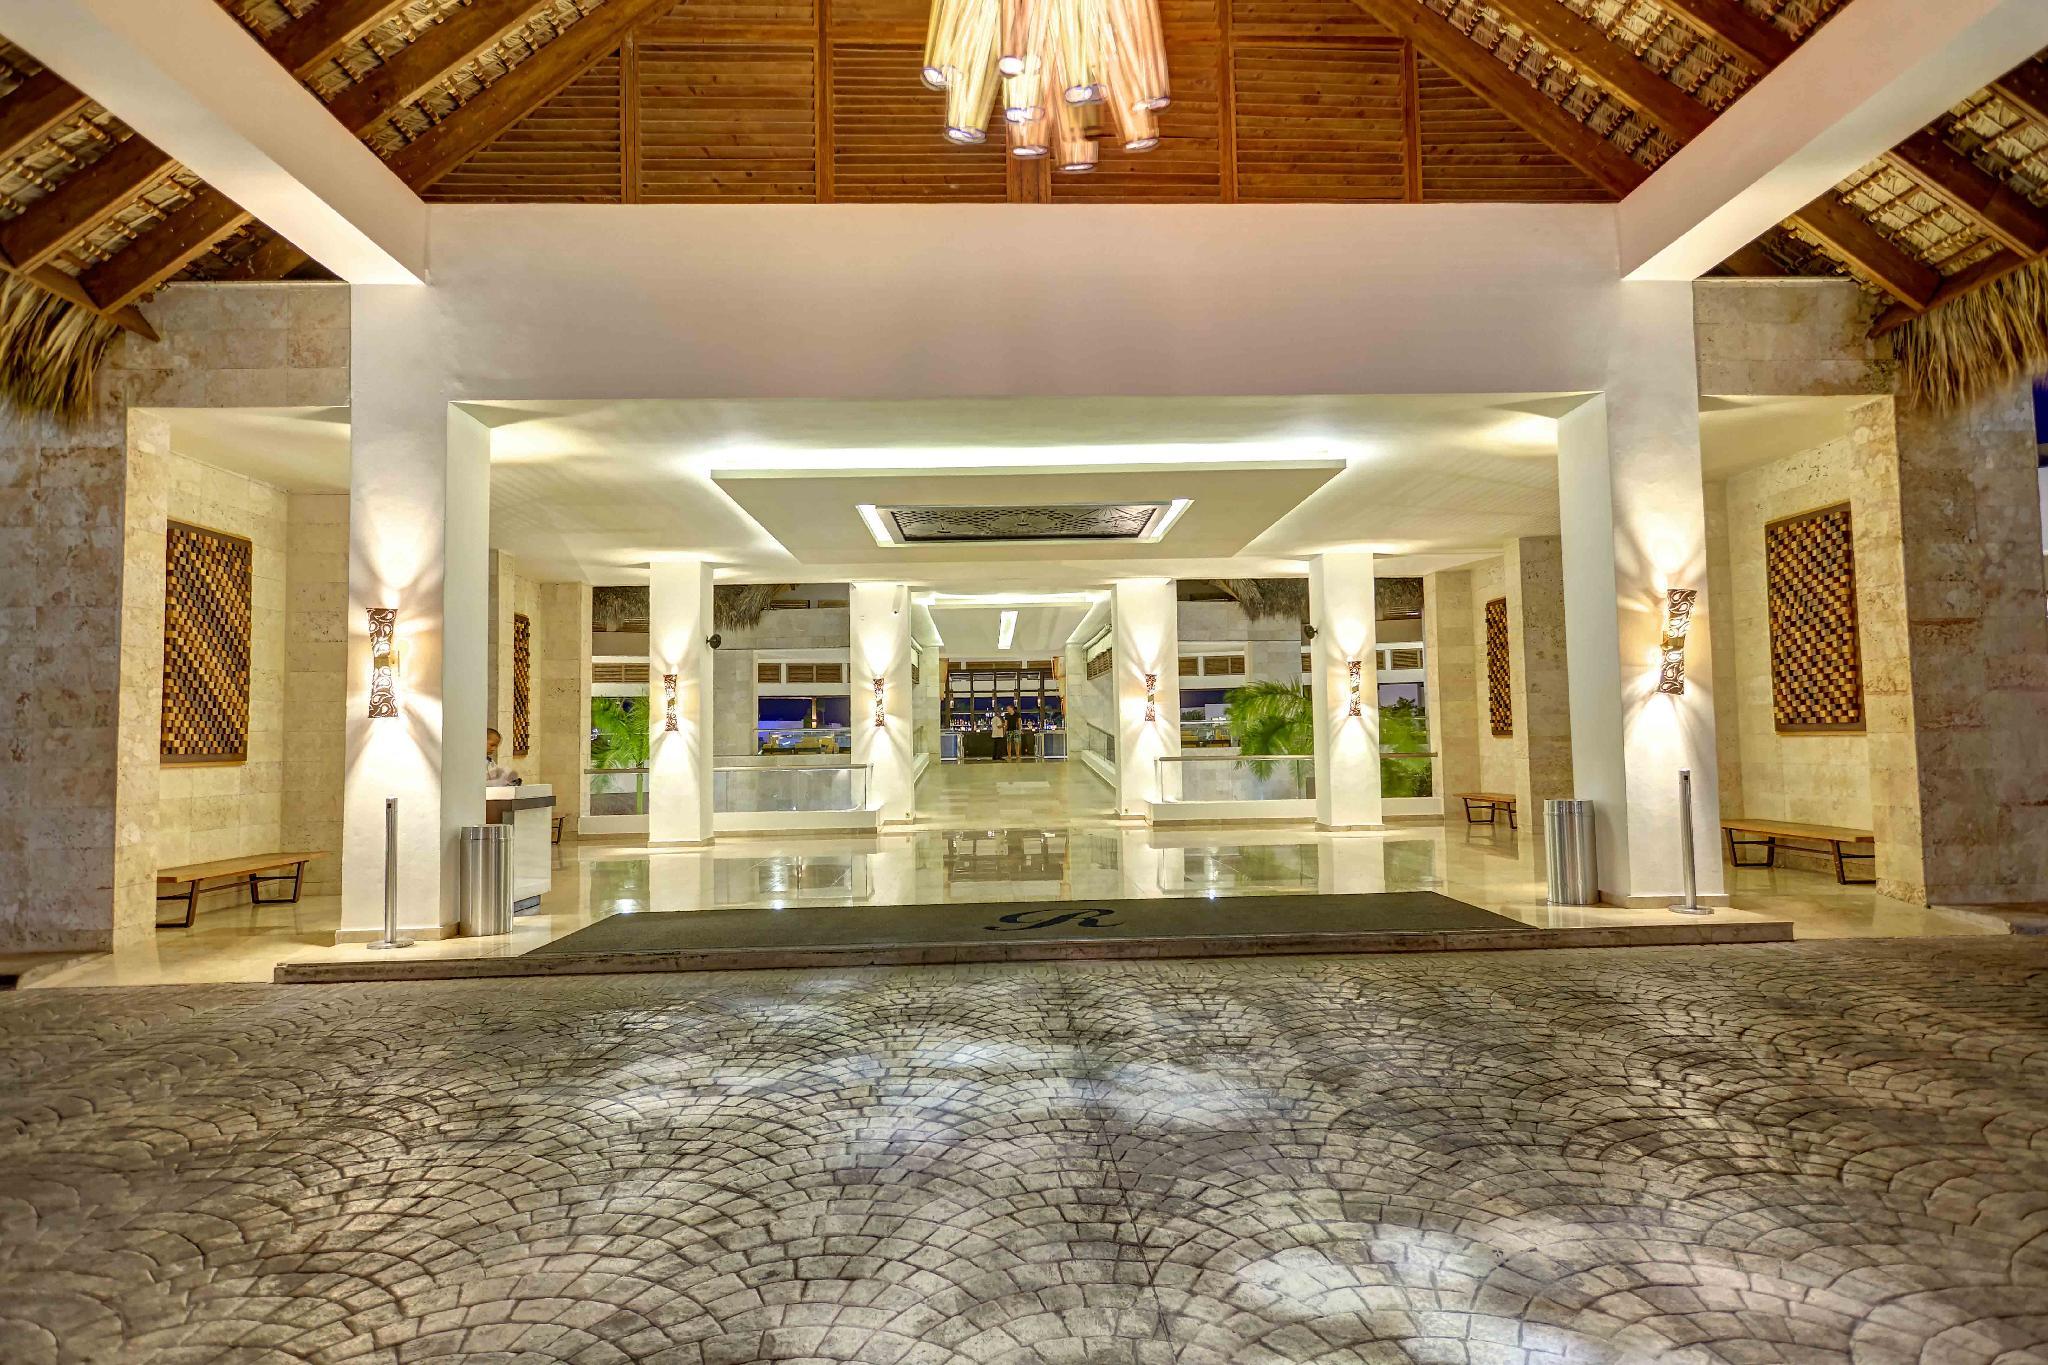 Hideaway at Royalton Punta Cana, An Autograph Collection All Inclusive Resort & Casino - Adults Only 写真